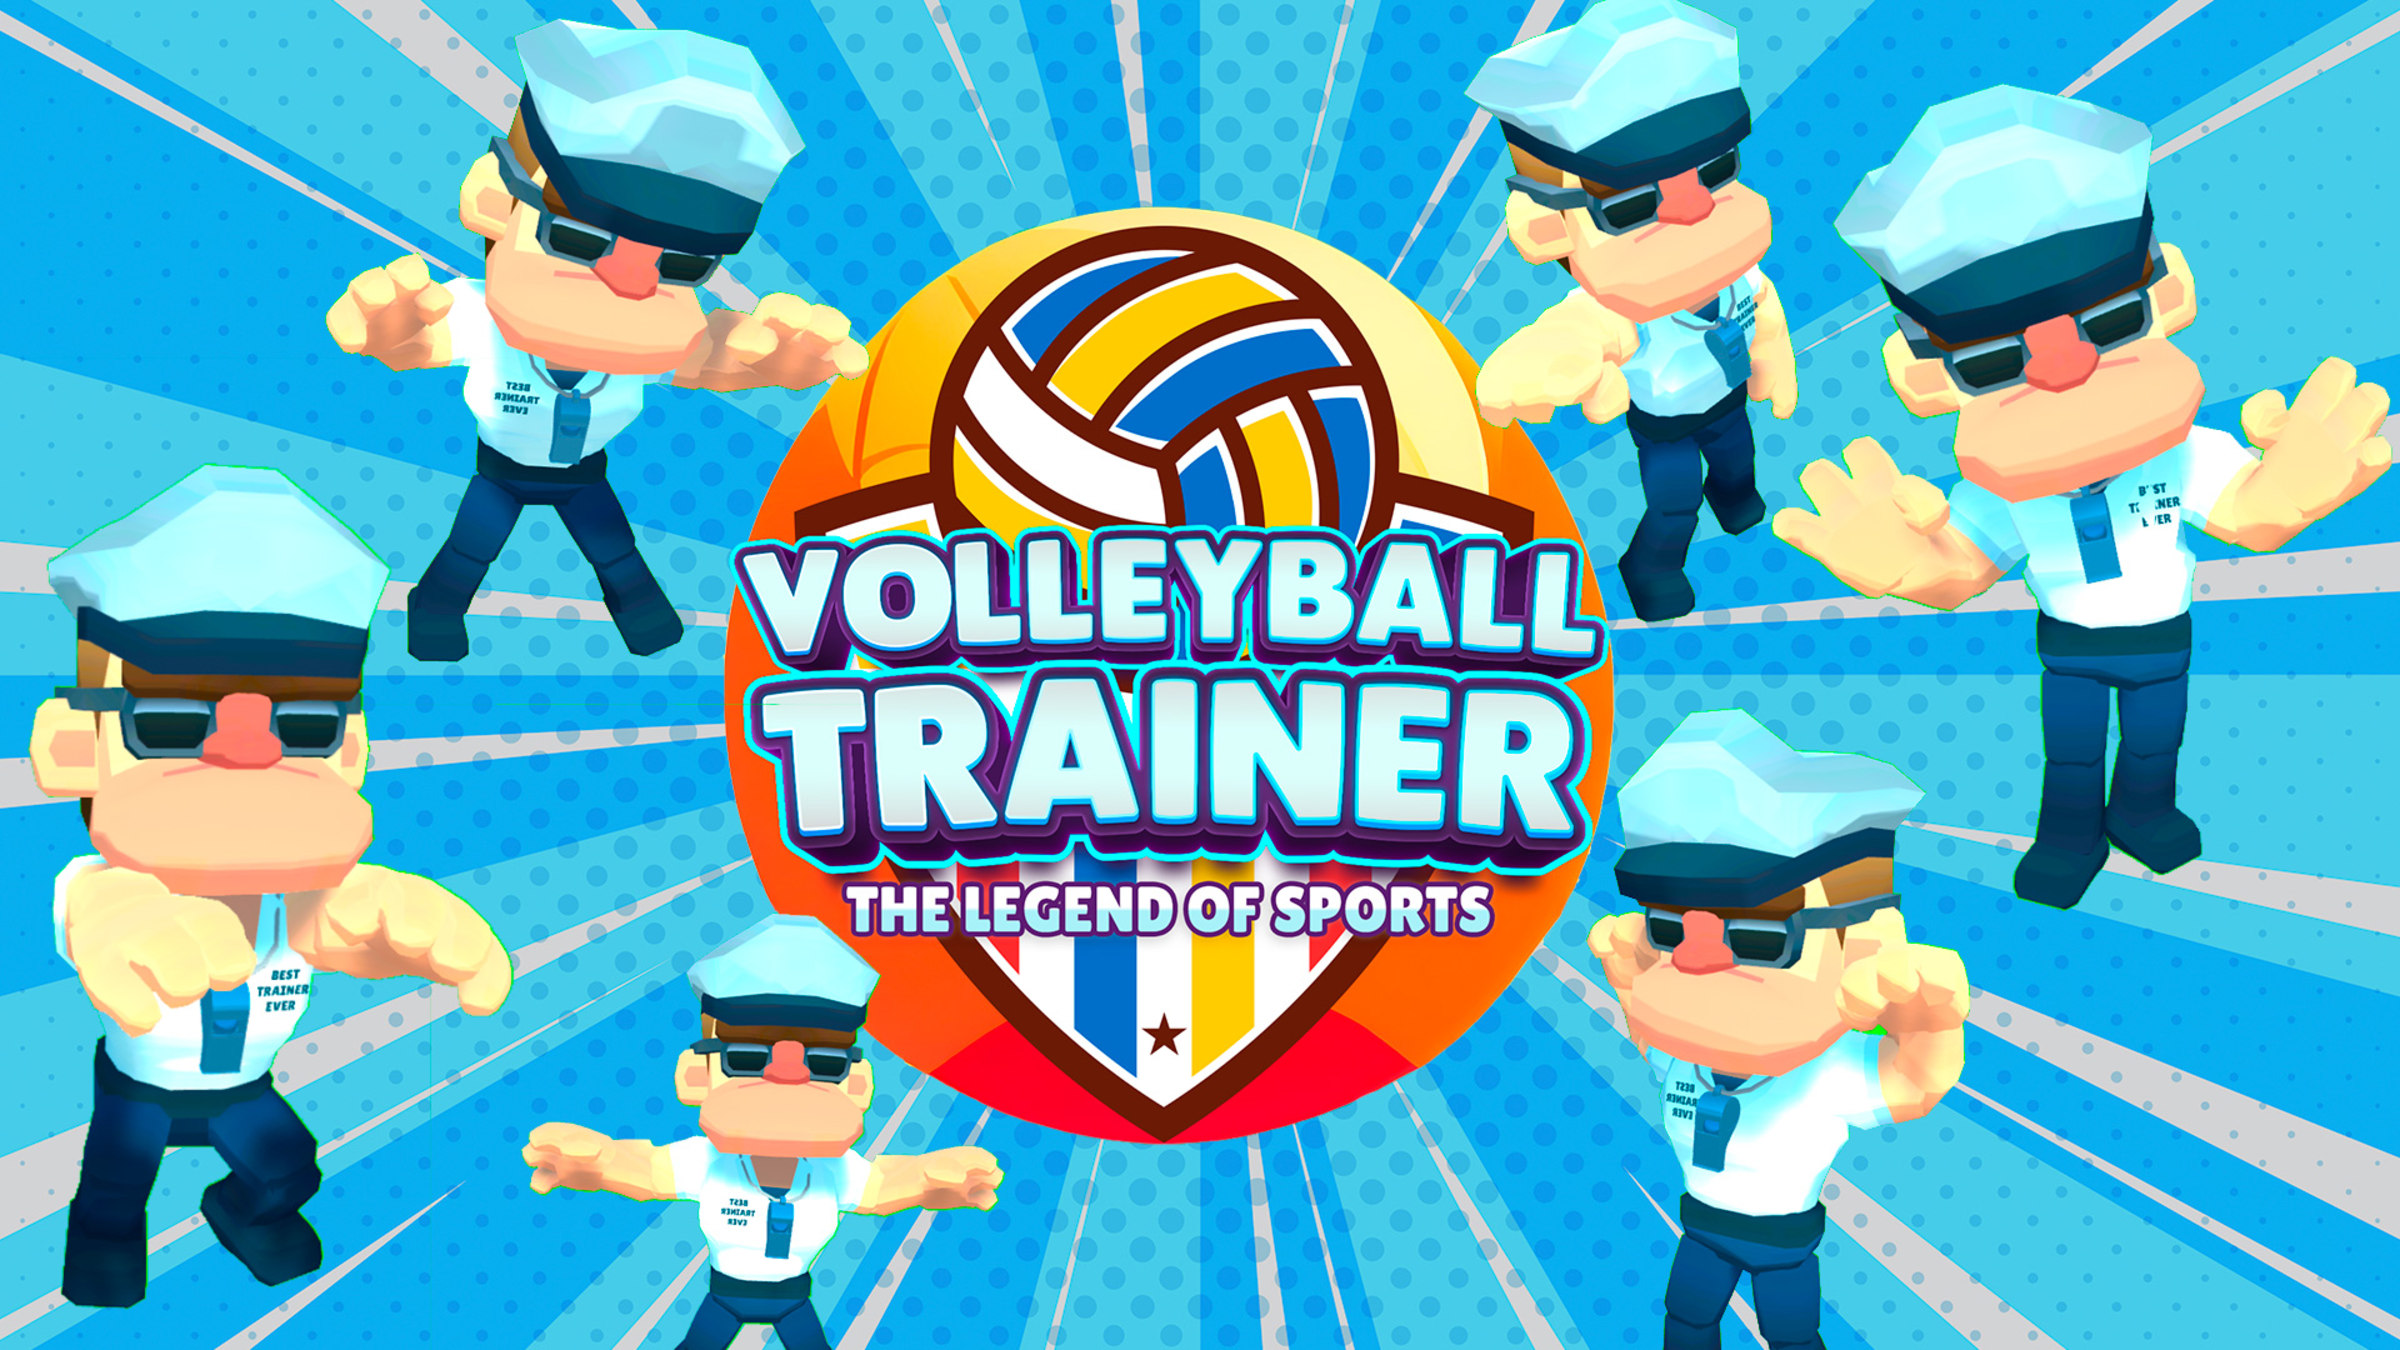 https://assets.nintendo.com/image/upload/c_fill,w_1200/q_auto:best/f_auto/dpr_2.0/ncom/en_US/games/switch/v/volleyball-trainer-the-legend-of-sports-switch/